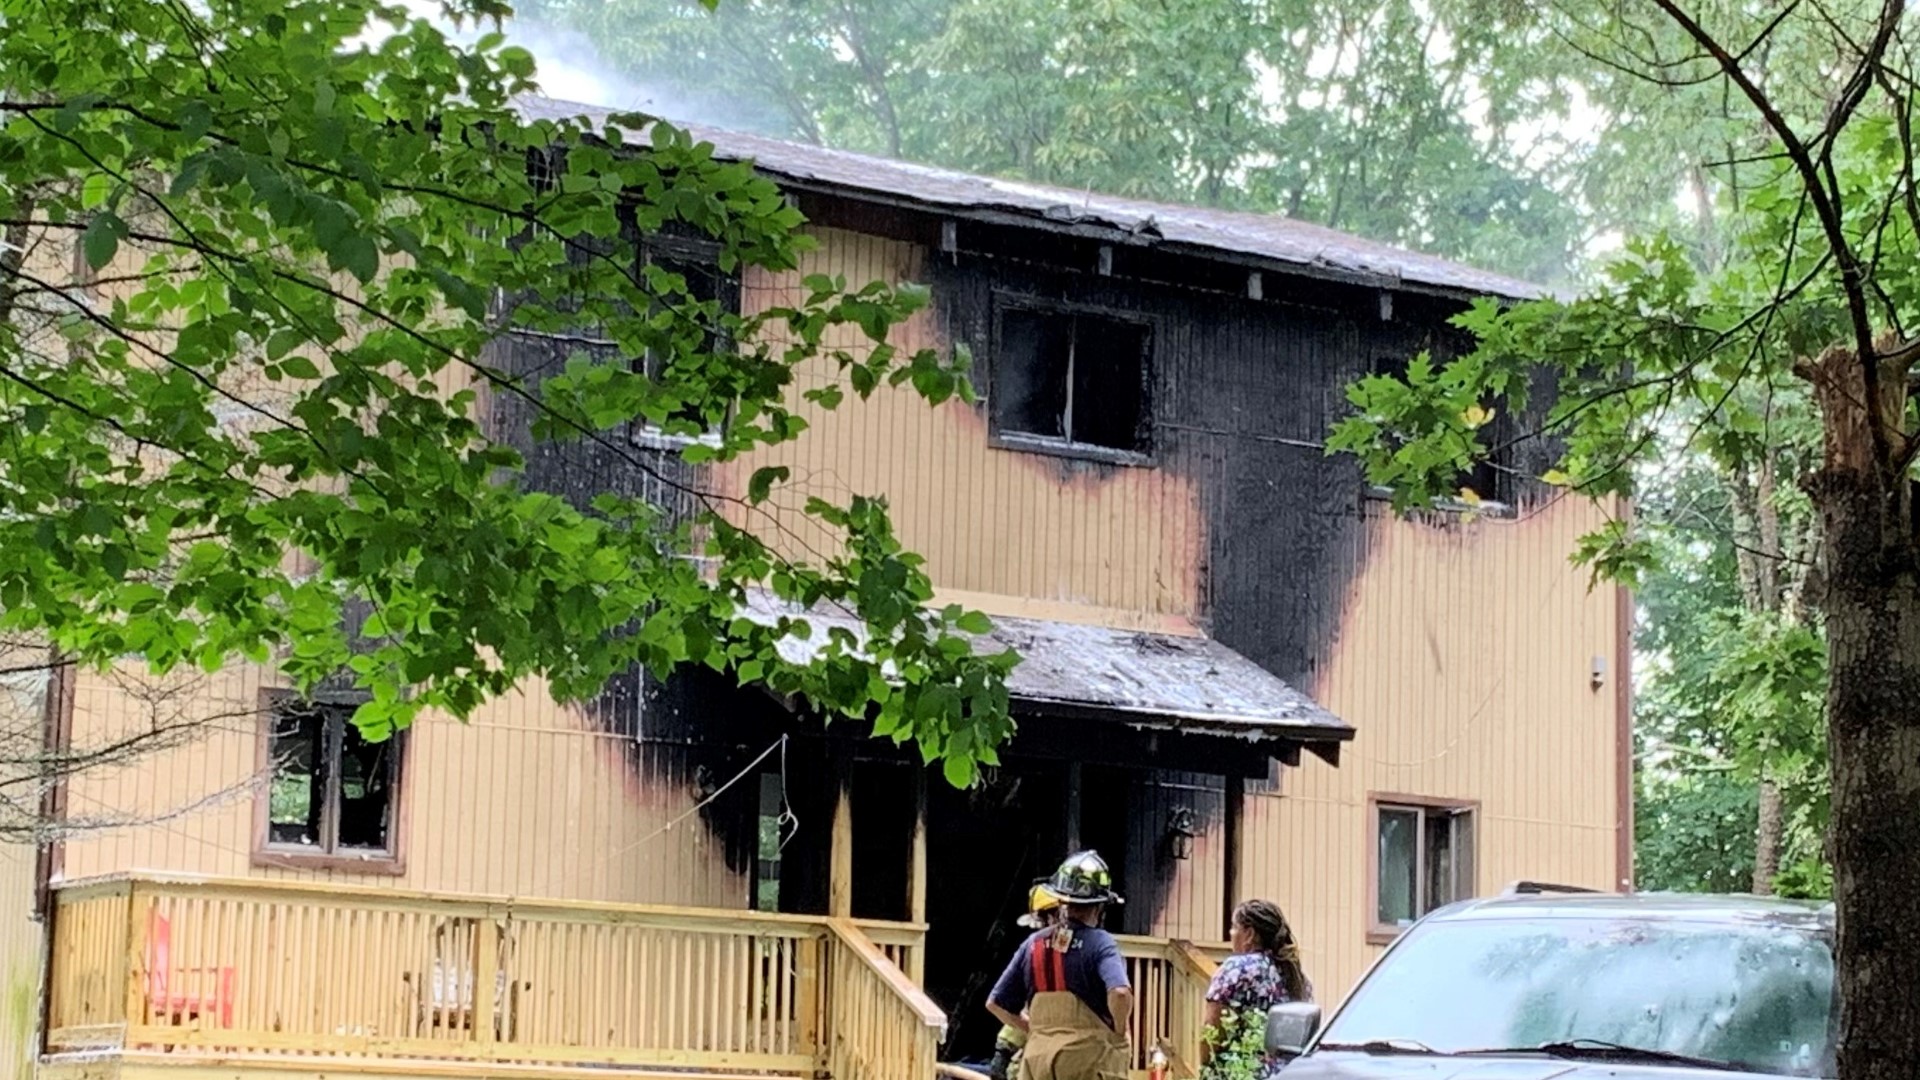 The place in Lehman Township caught fire around noon on Tuesday.